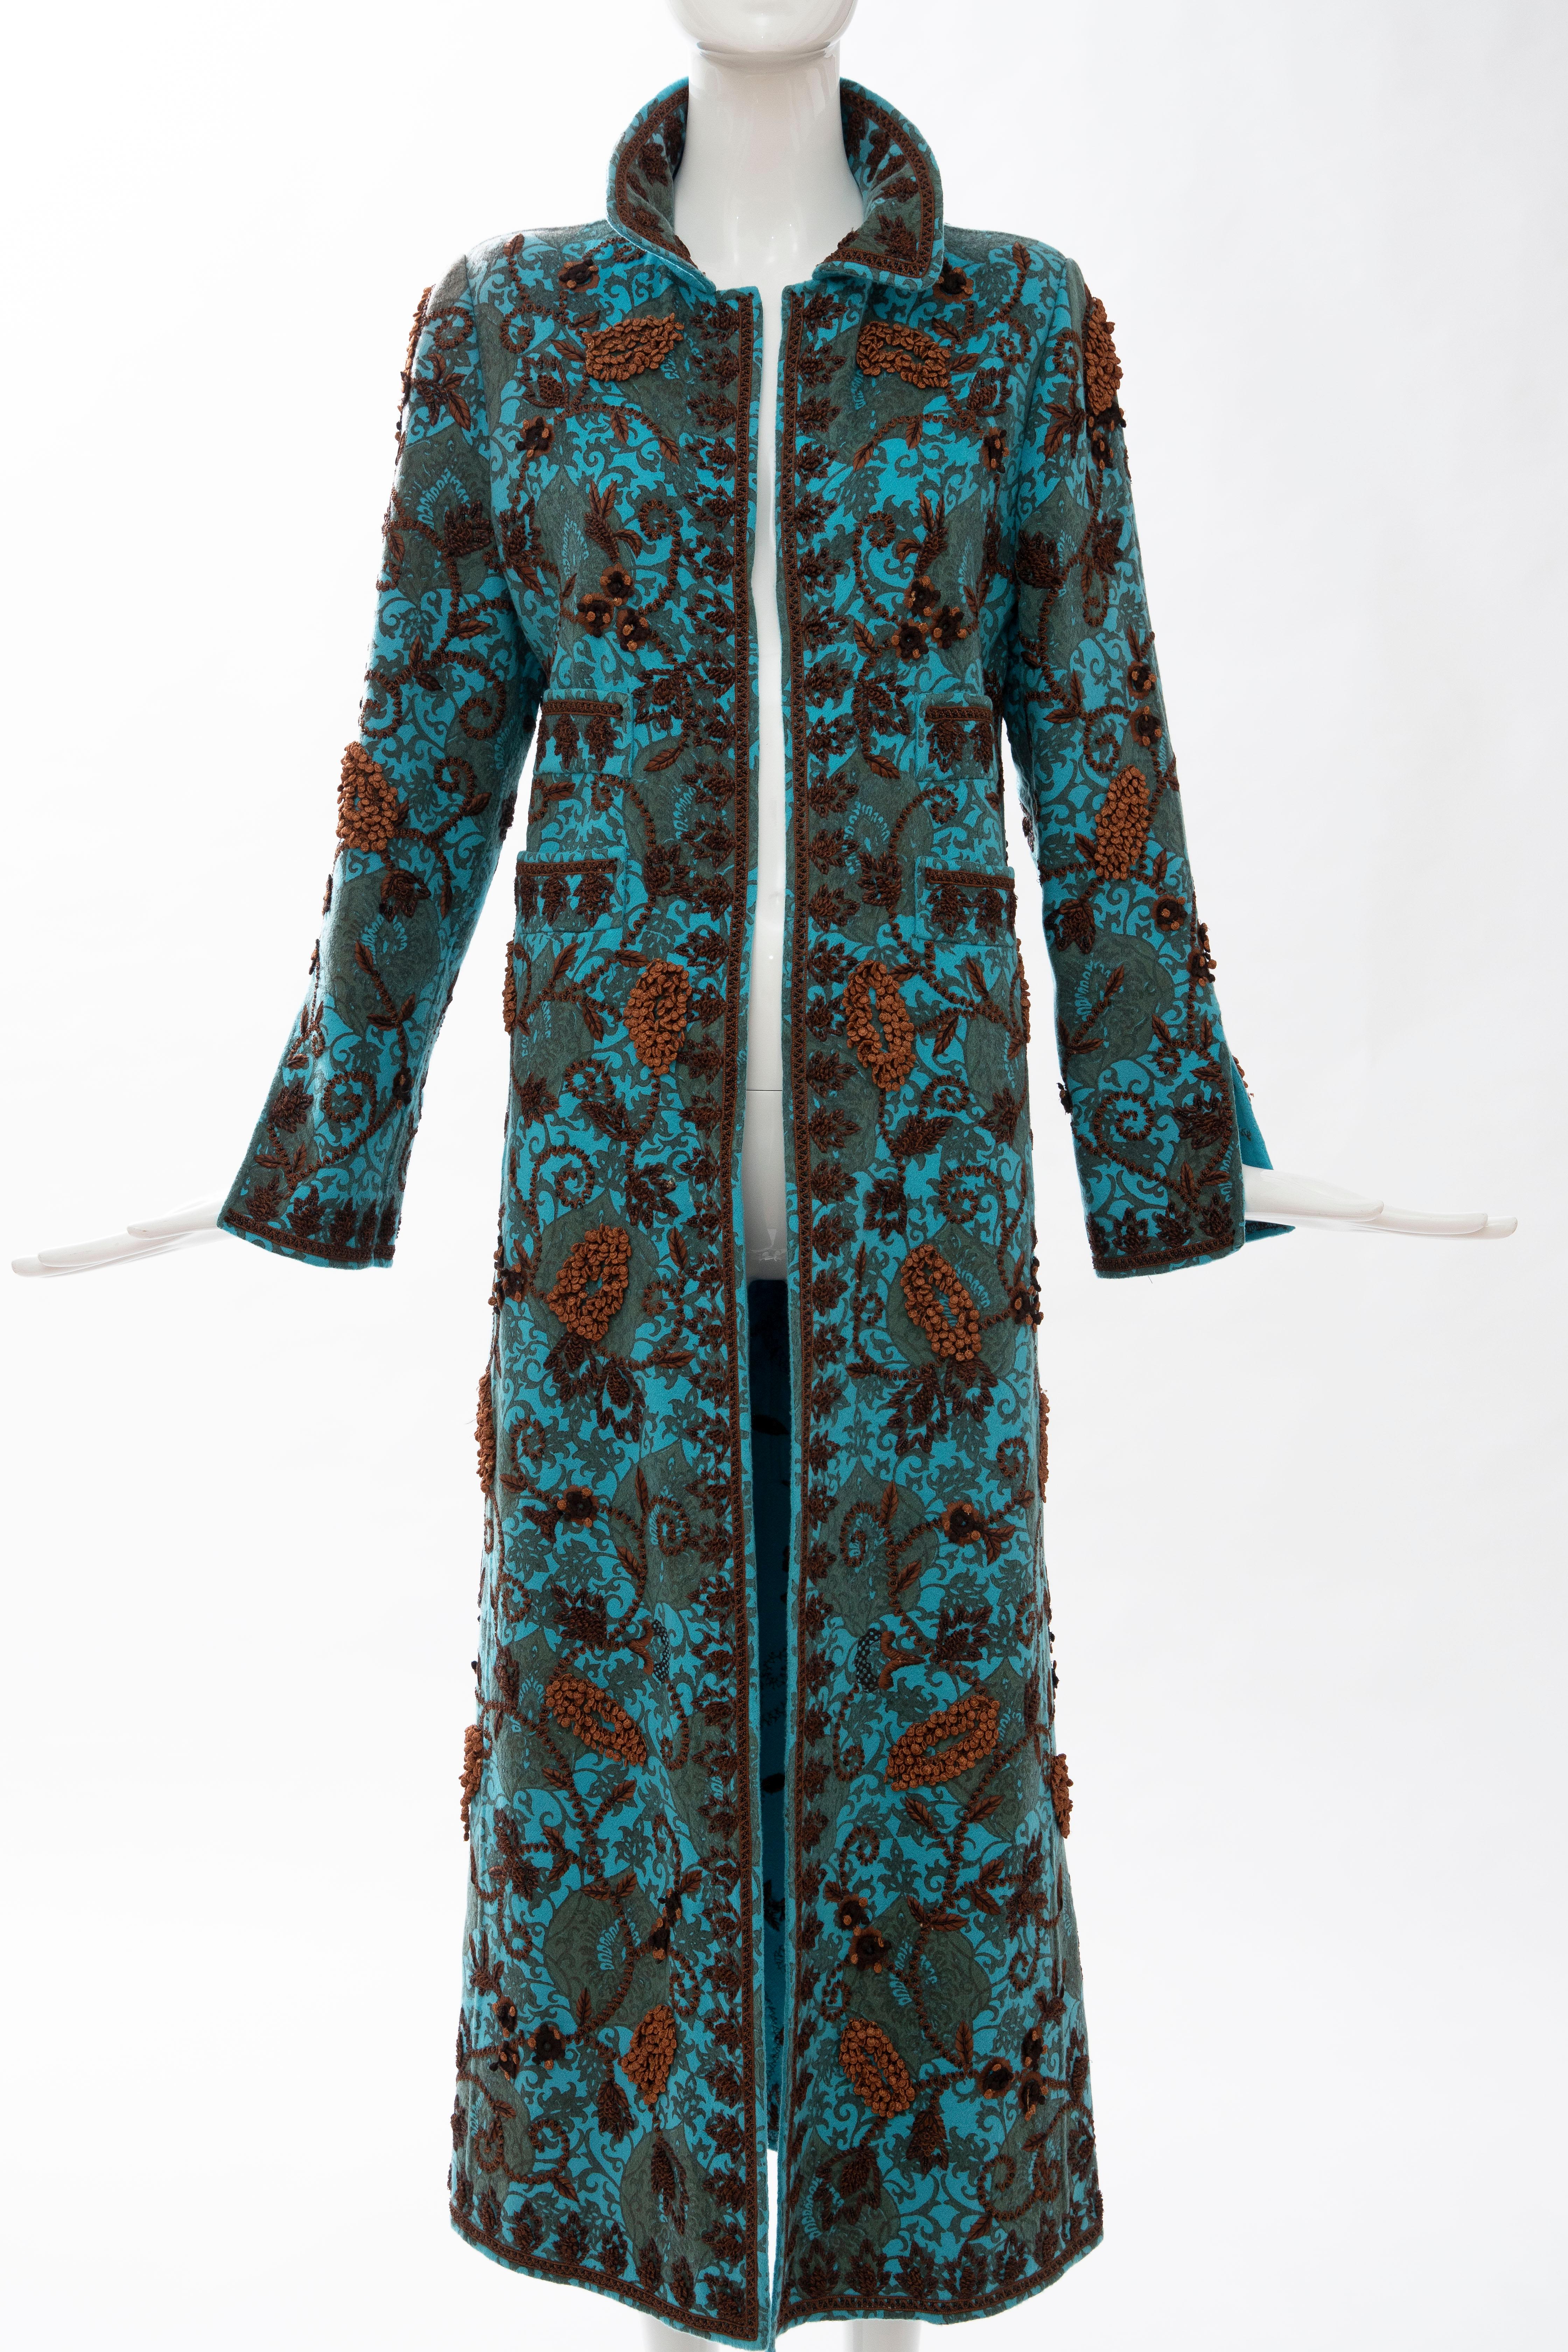  Oscar De La Renta cerulean cashmerecoat featuring floral chocolate brown and rust bead embroidery throughout with structured shoulders, pointed collar, dual patch pockets and open front.

US. 8
Bust: 36,  Waist: 36, Hip: 44, Shoulder: 15, Length: